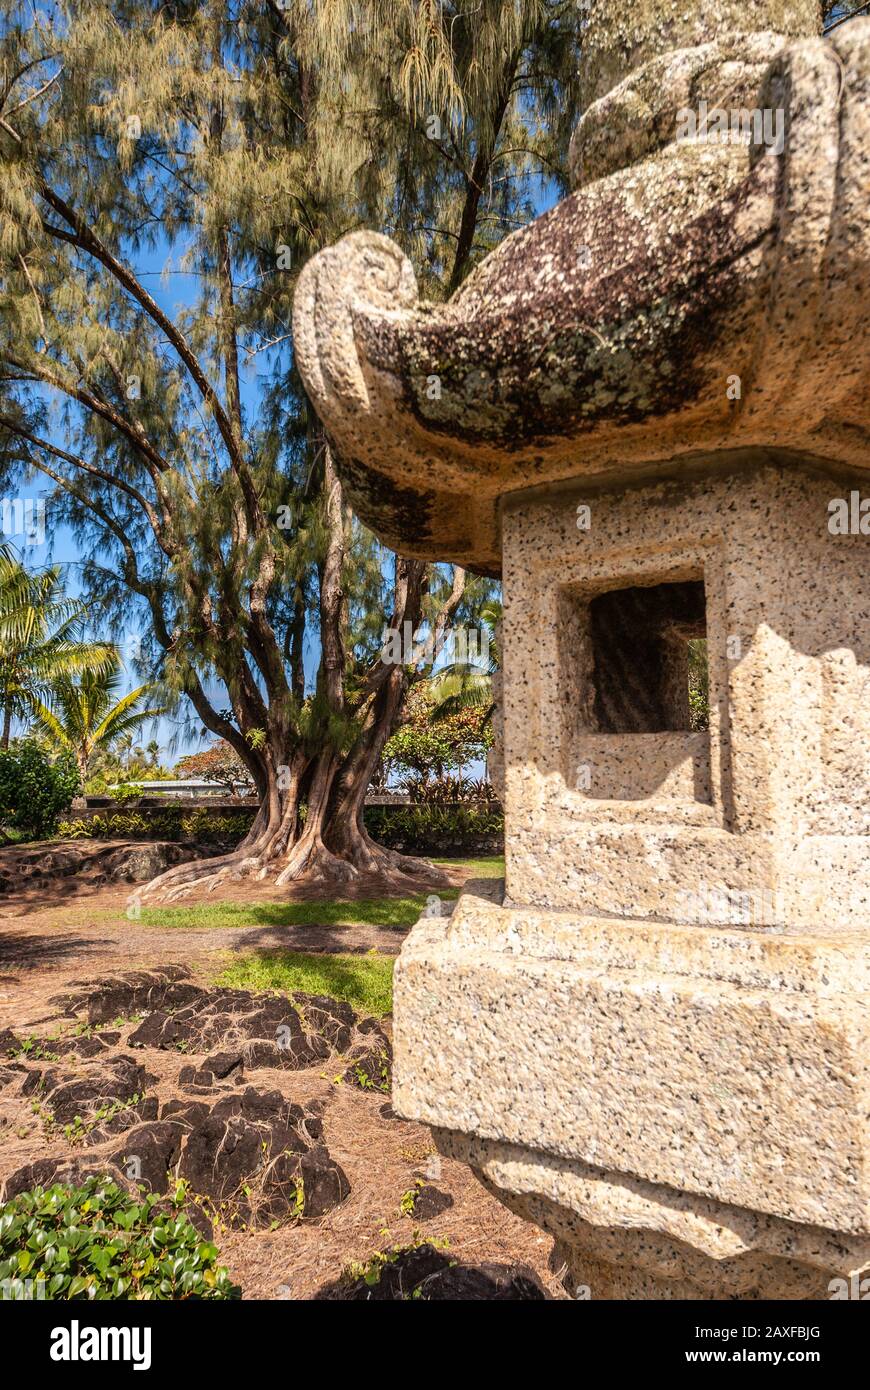 Hilo, Hawaii, USA. - January 9, 2012: Part of beige stone Japanese lantern and brown dirt, black lava stone and green trees in Liliuokalani Gardens. B Stock Photo